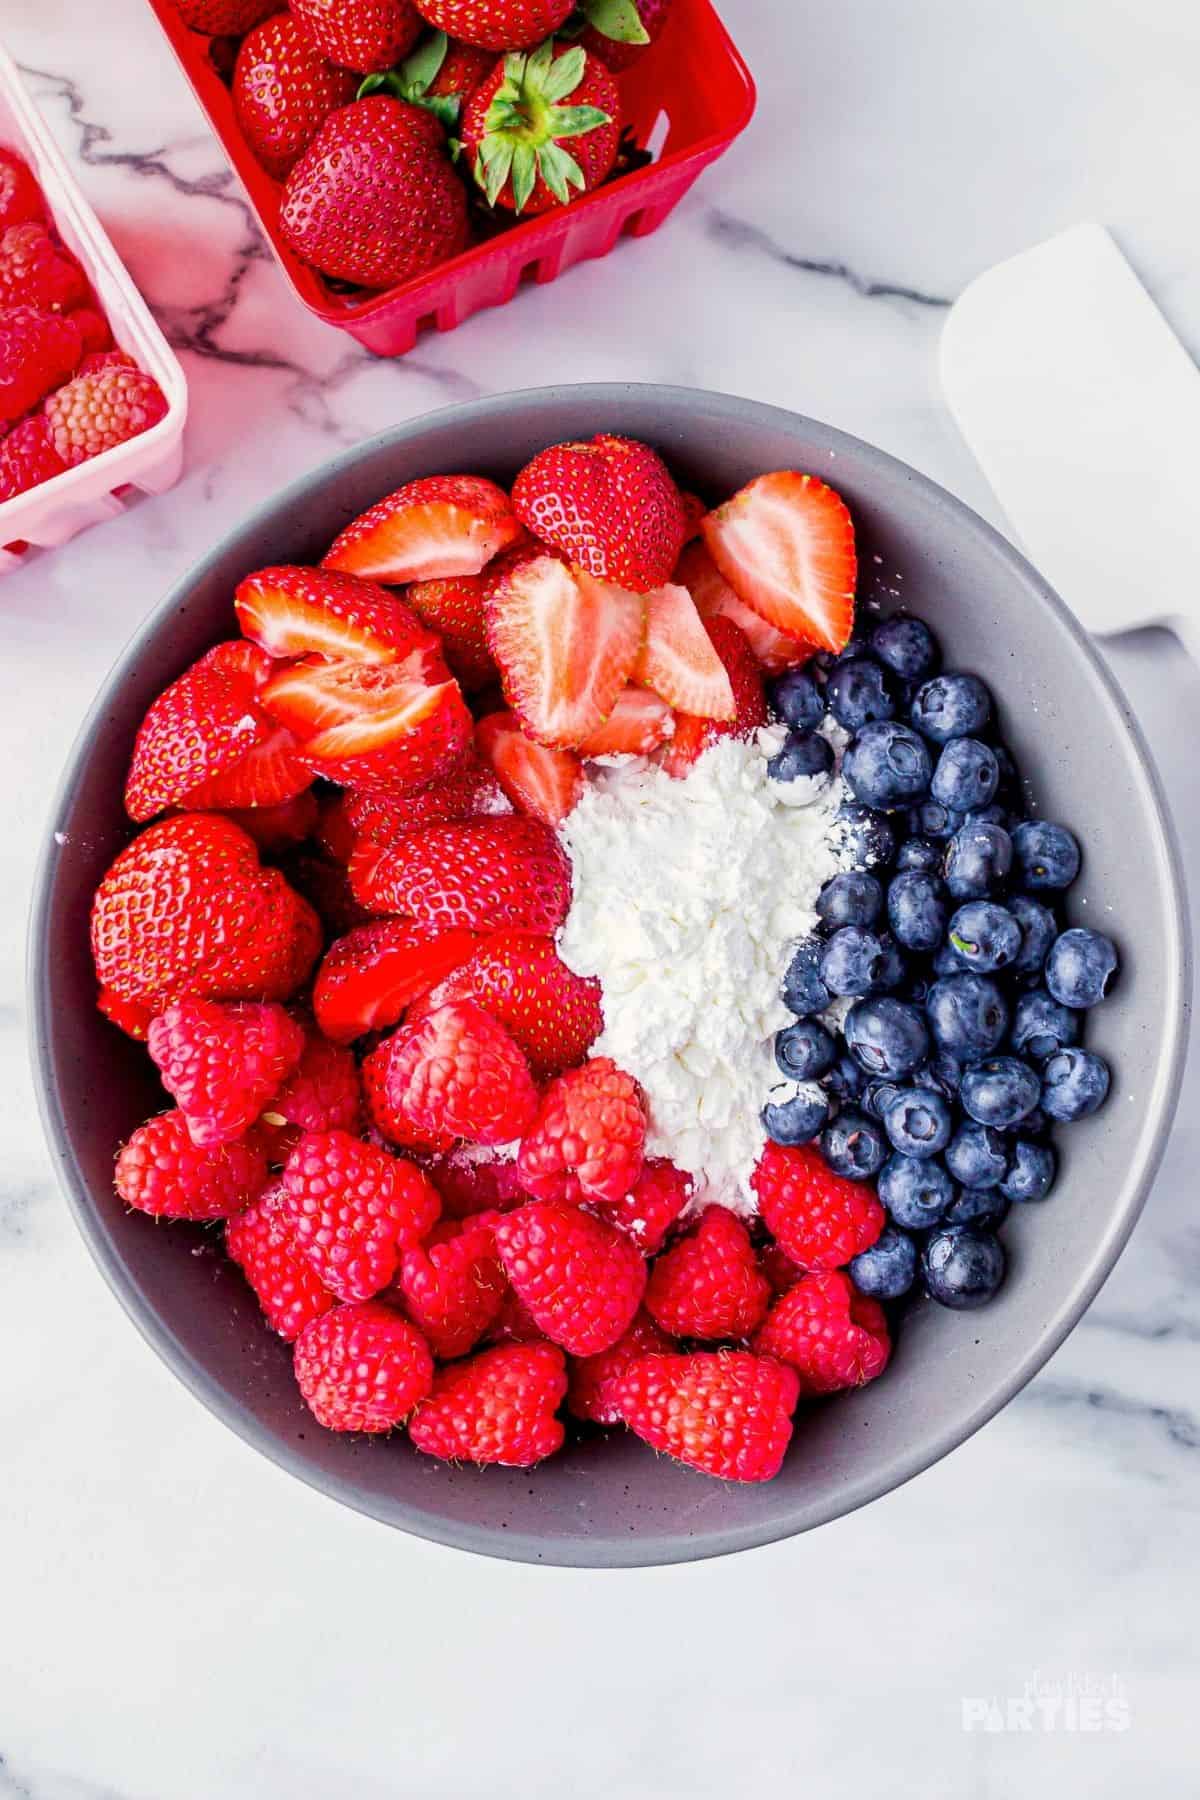 Strawberries, raspberries, and blueberries are mixed in a bowl with cornstarch, juice, and sugar.